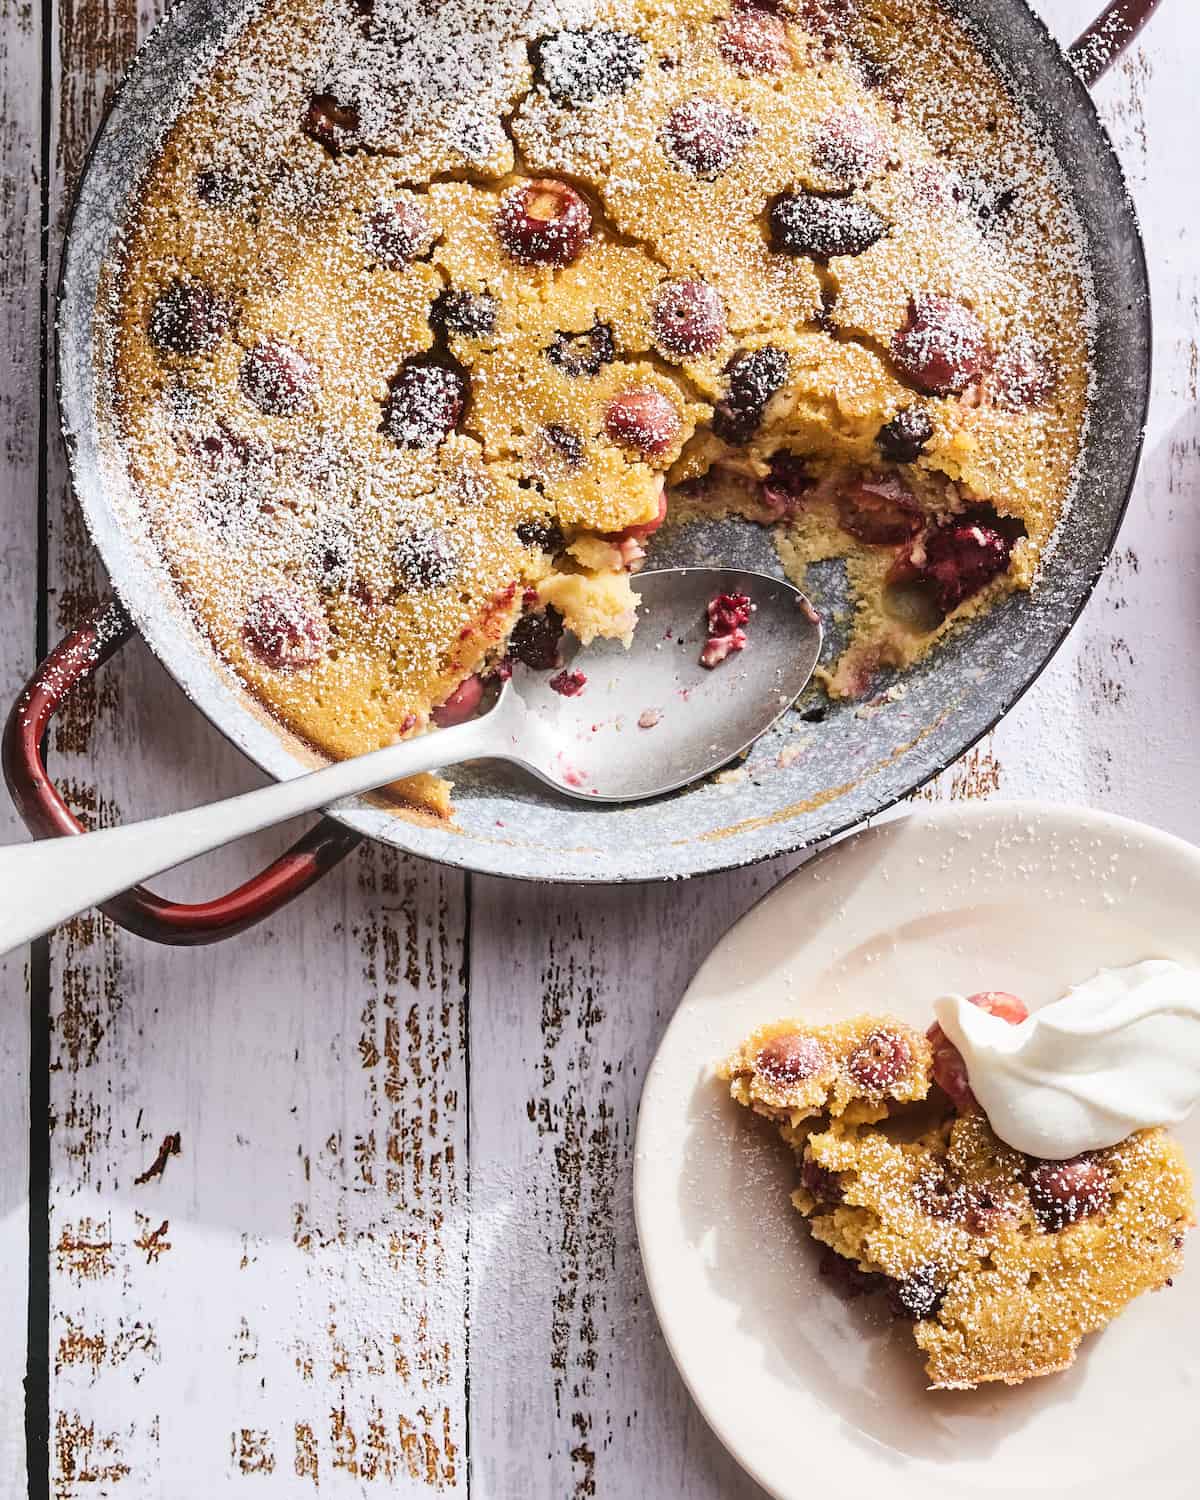 Cherry Clafoutis in a round copper metal baking dish on a white washed wood background with a dusting of powdered sugar sprinkled over top and a spoonful or two missing from the bottom right corner of the baking dish and a serving of cherry clafoutis on a plate in the bottom right corner with a healthy dollop of whipped cream.